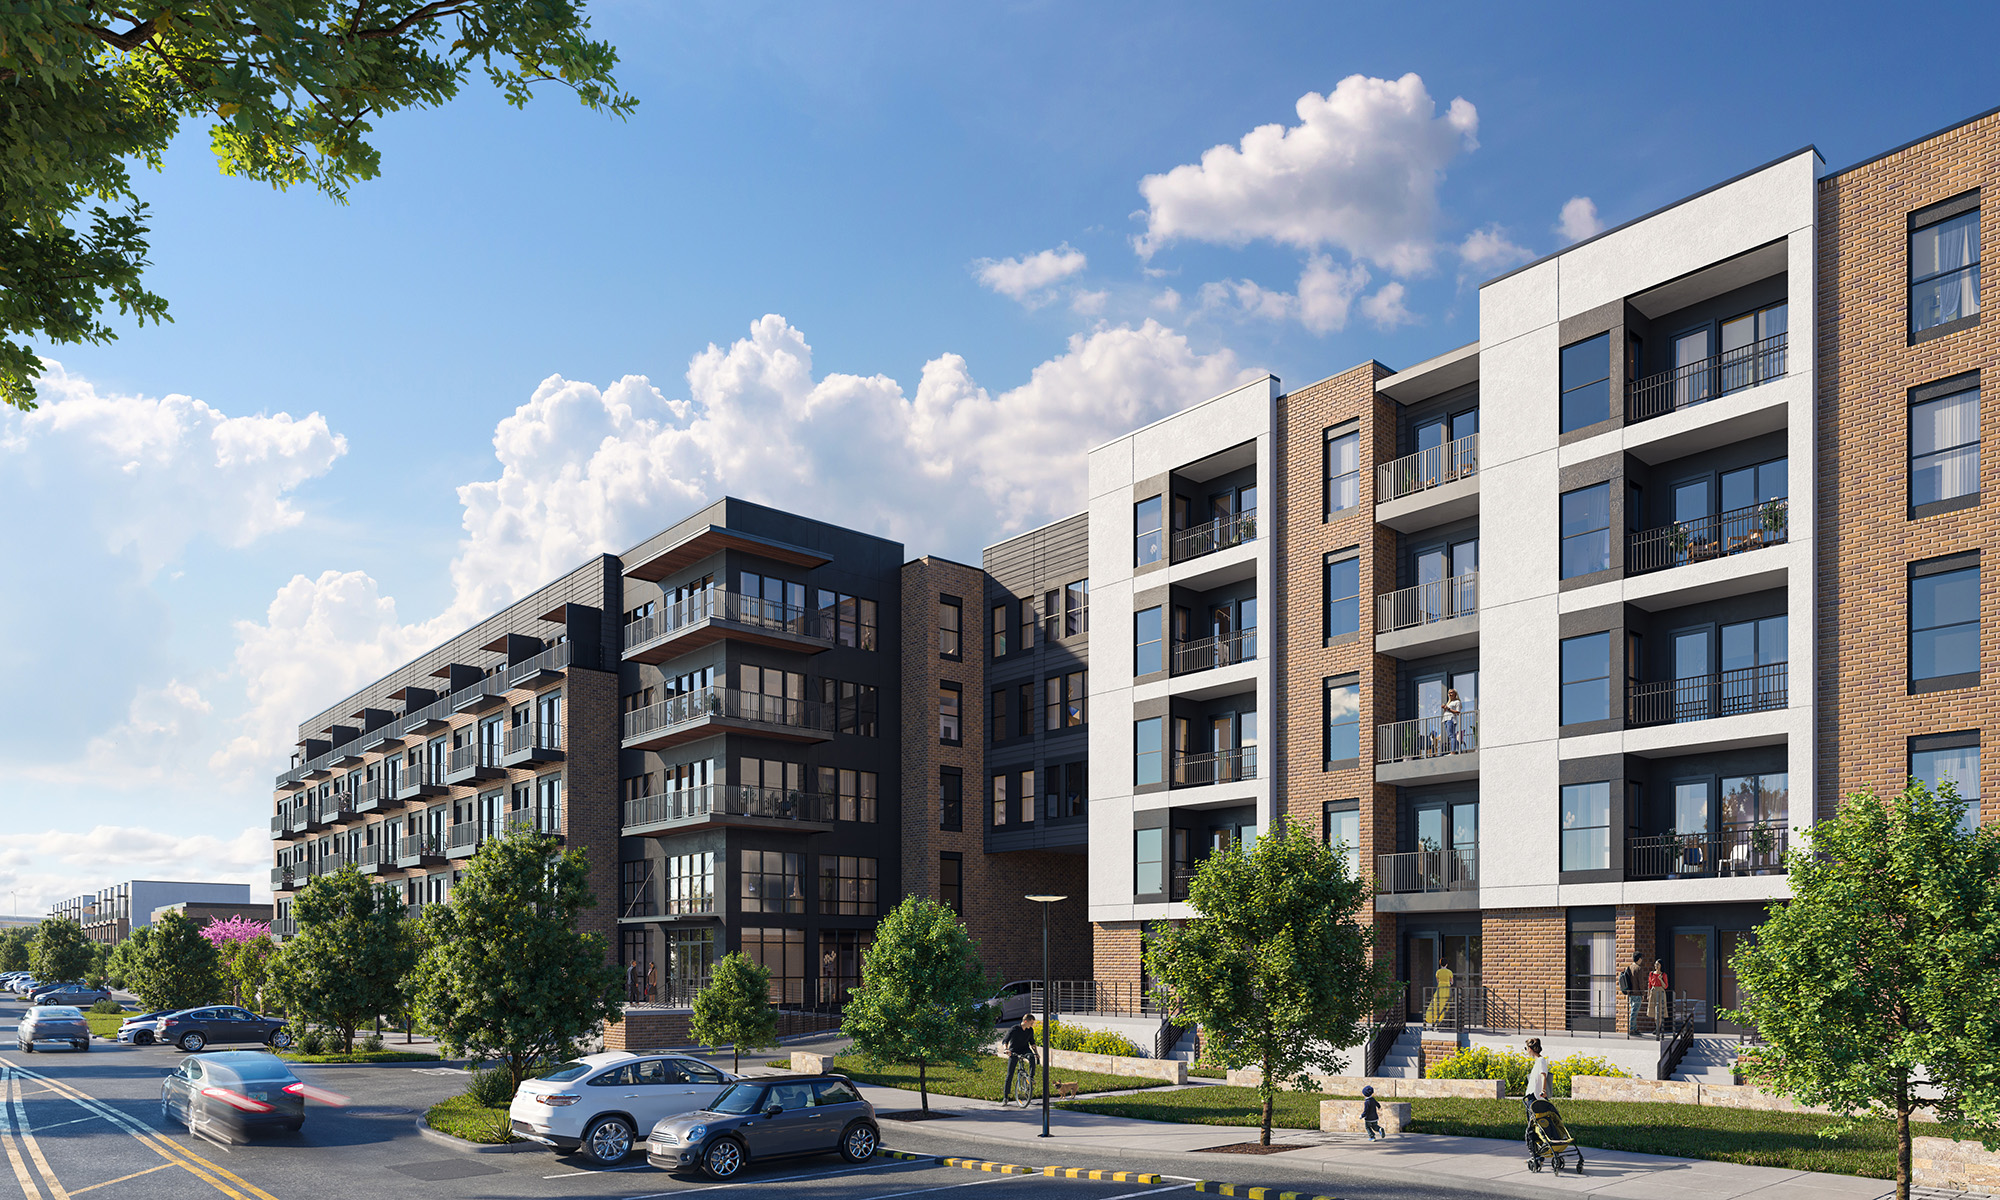 The Vickery mixed-use multifamily rendering